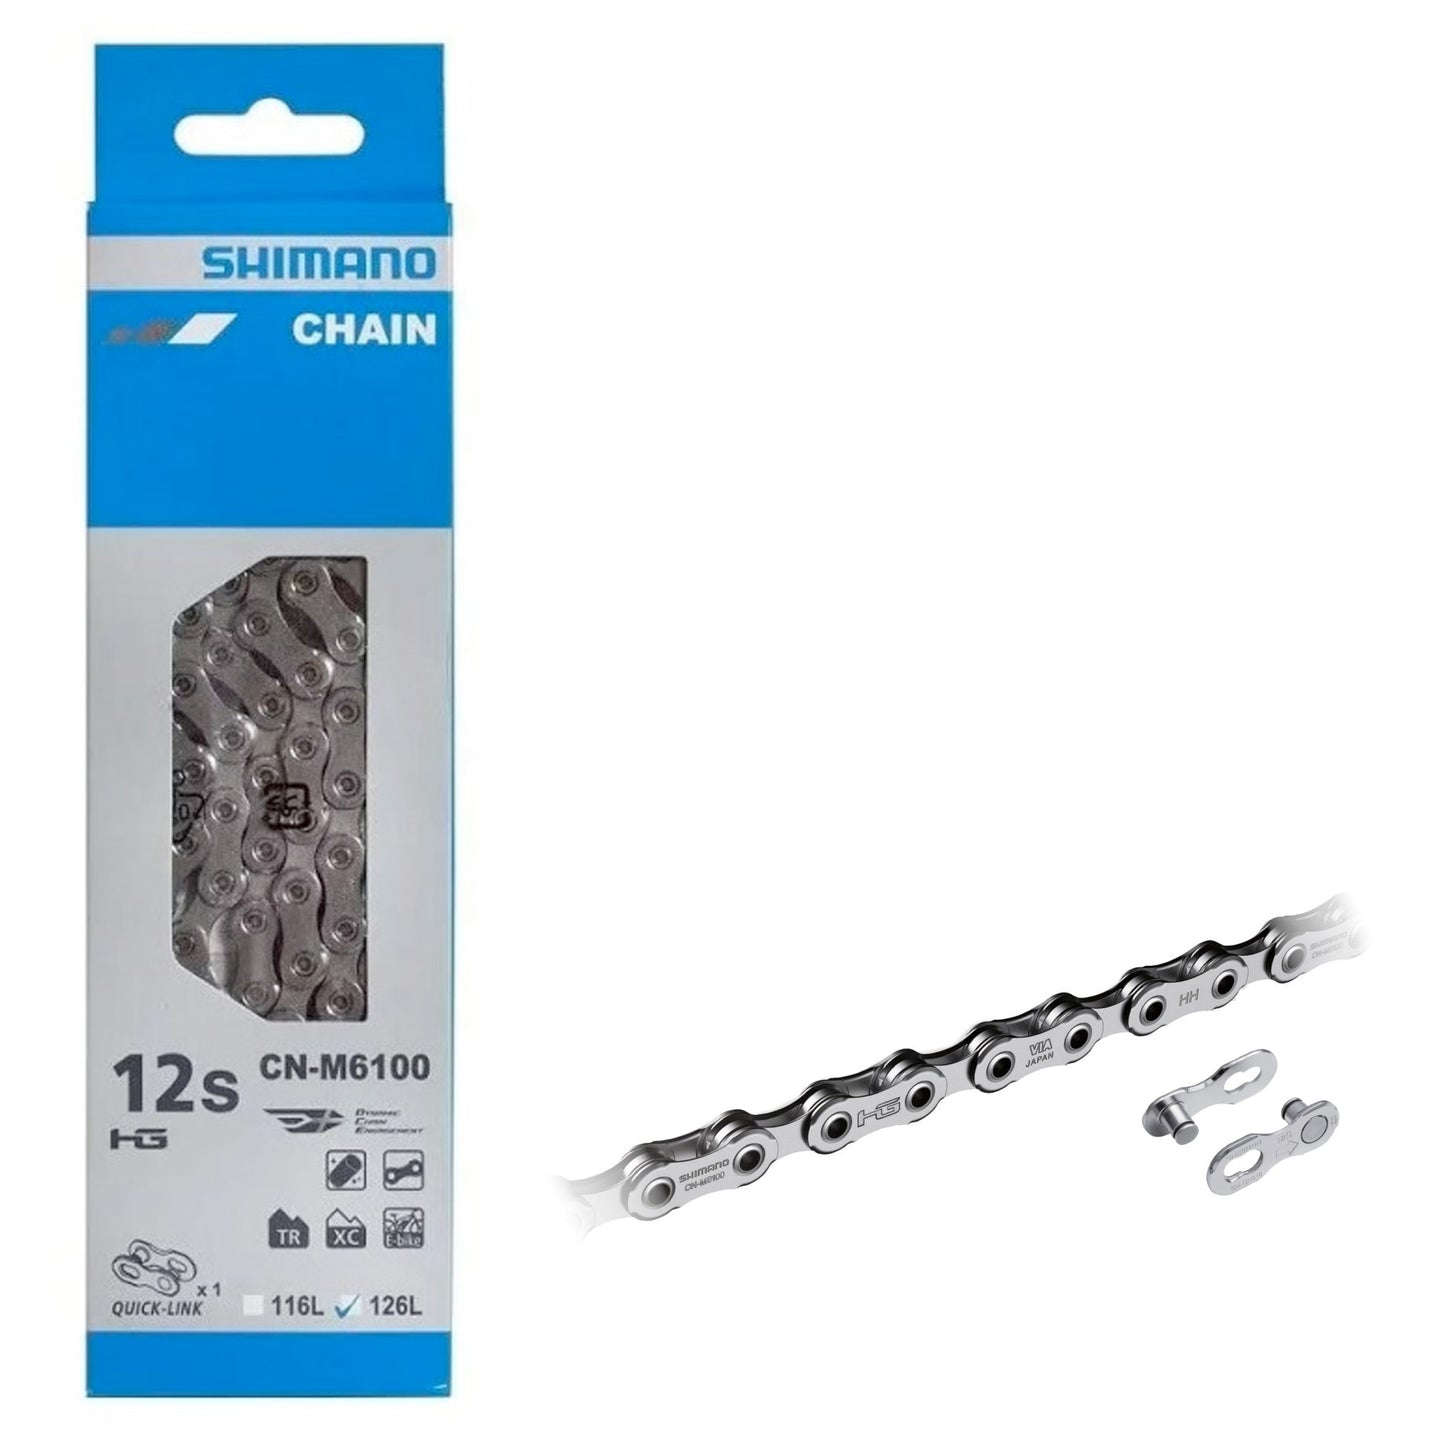 Shimano Deore CN-M6100 12-Speed Chain with Quick Link - 126 Links